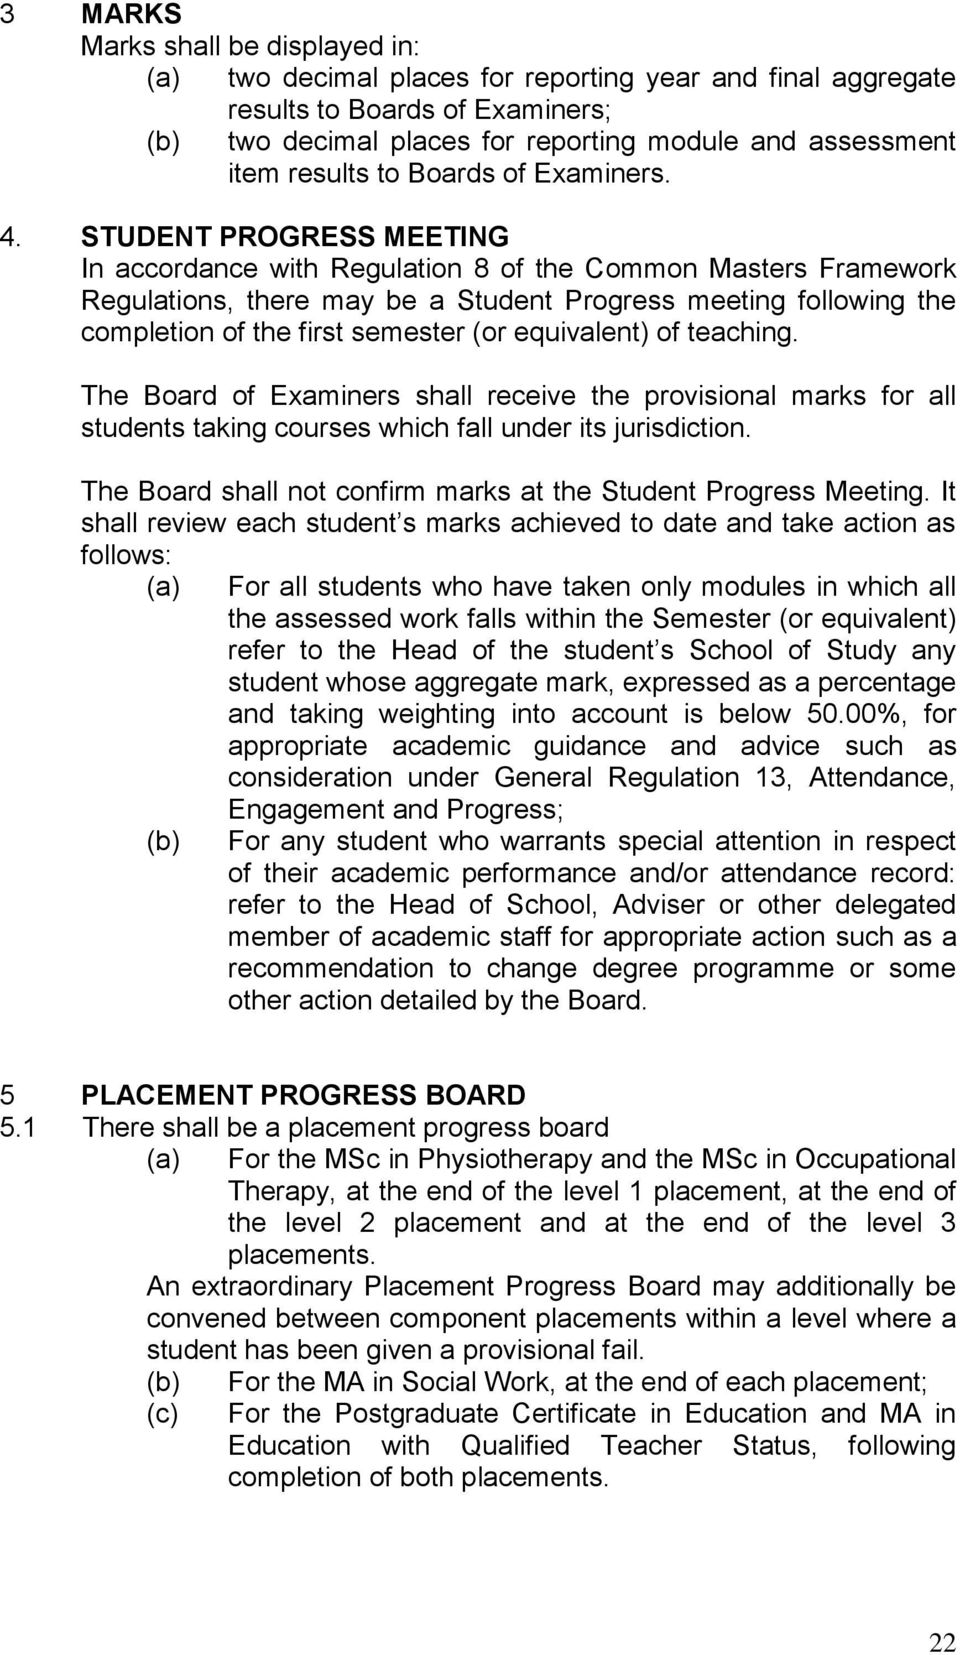 STUDENT PROGRESS MEETING In accordance with Regulation 8 of the Common Masters Framework Regulations, there may be a Student Progress meeting following the completion of the first semester (or